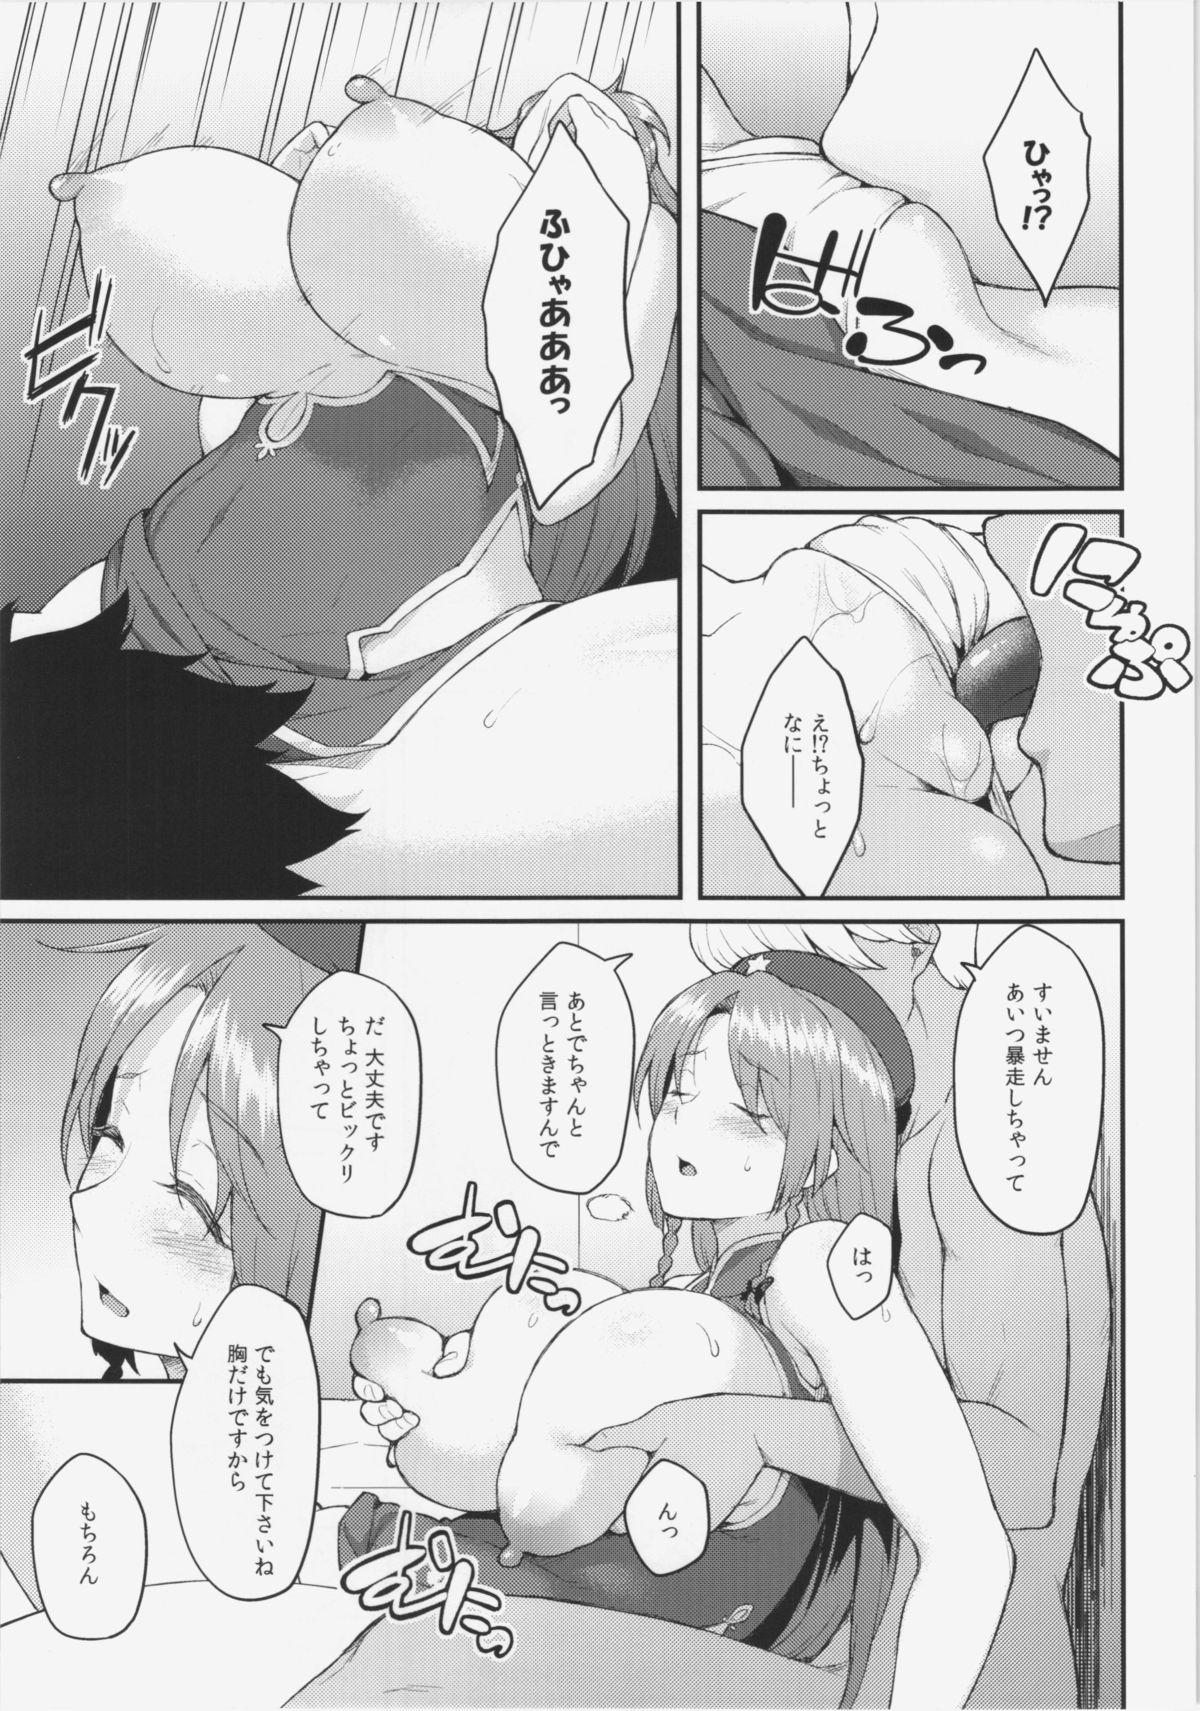 Groping Hong Meiling no Oshigoto - Touhou project Athletic - Page 9